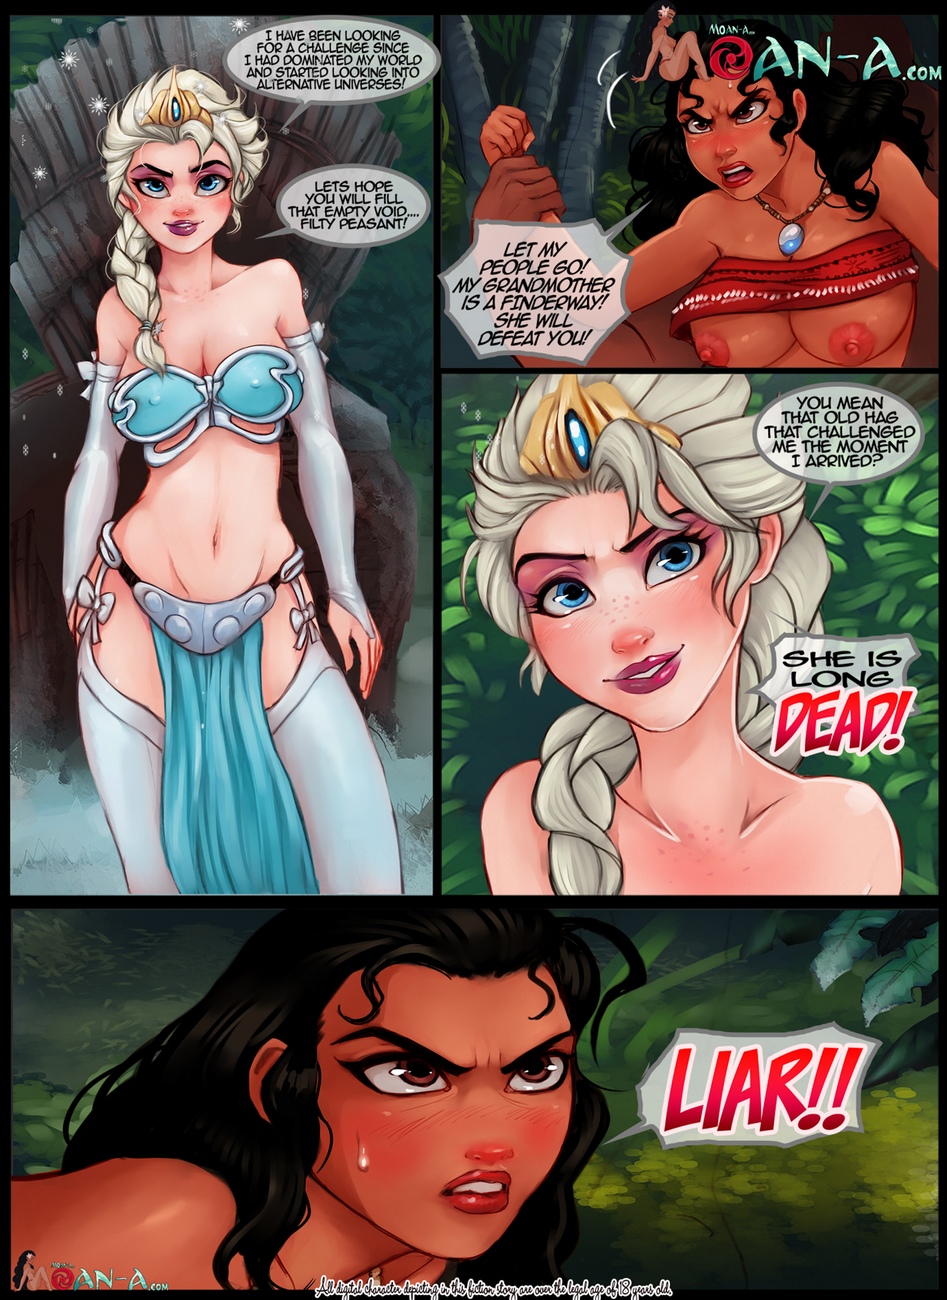 Moan-A 1 page 7